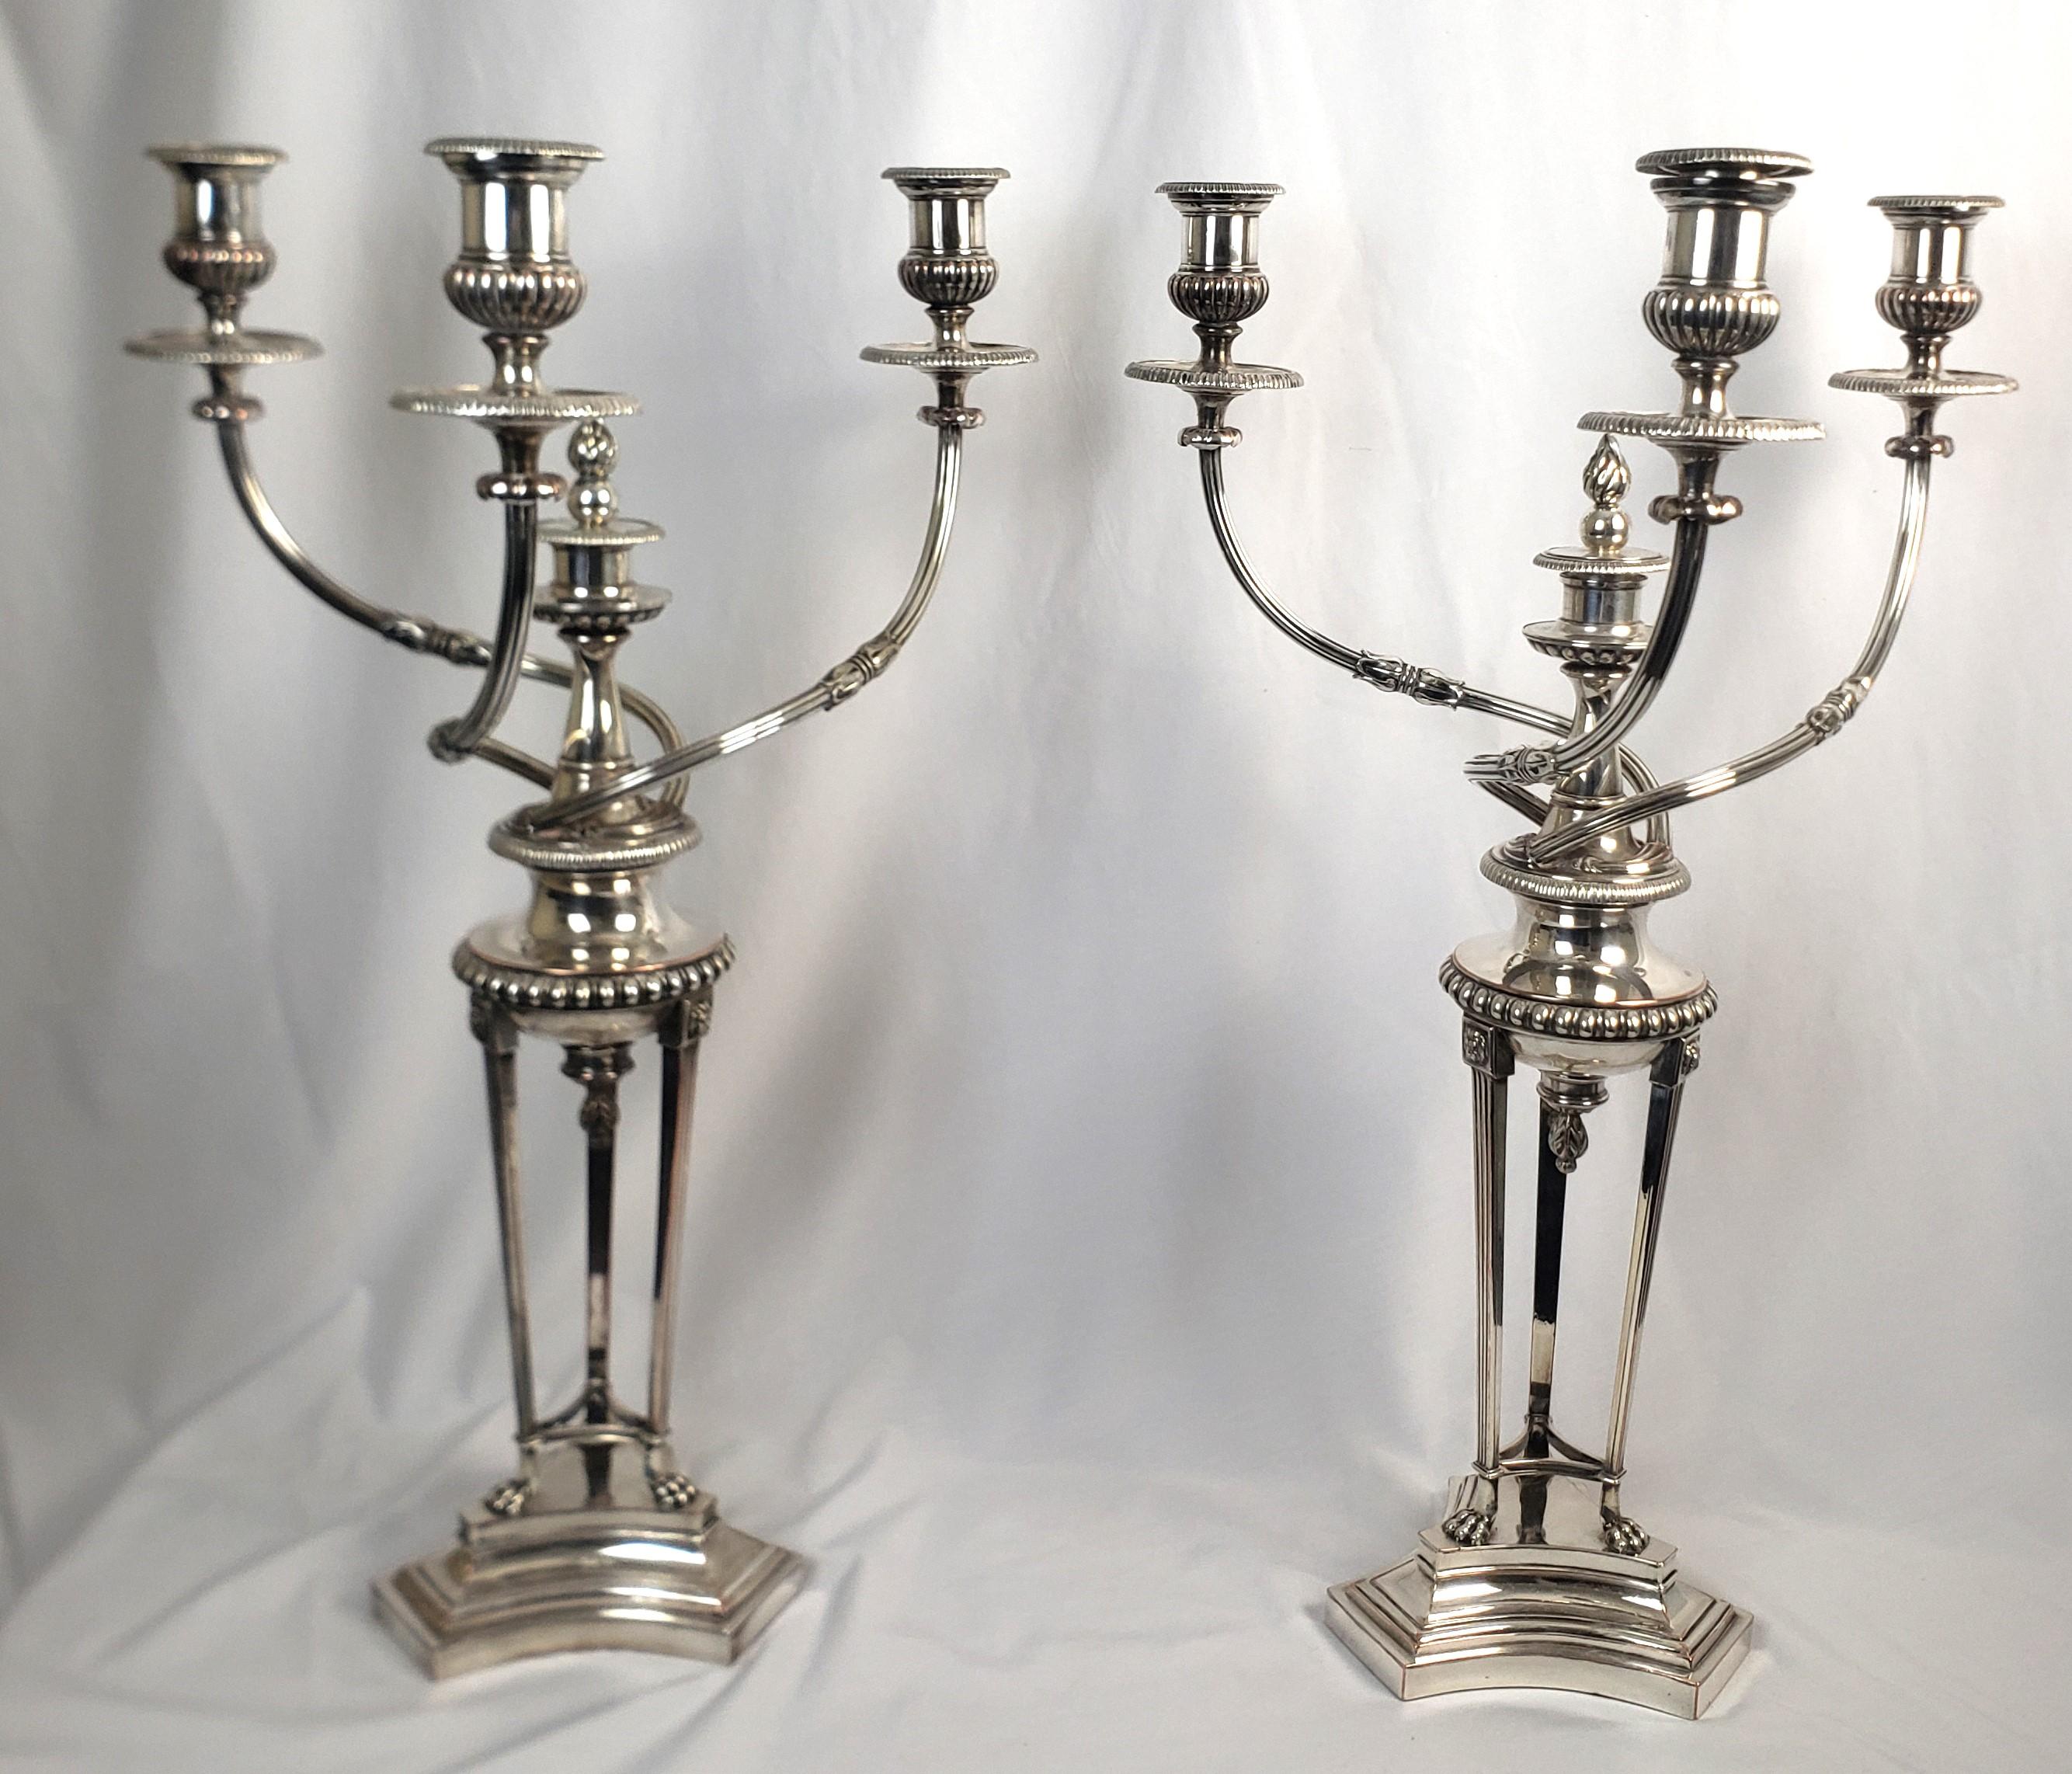 English Pair of Huge Antique Matthew Boulton Regency Three Arm Silver Plated Candelabras For Sale